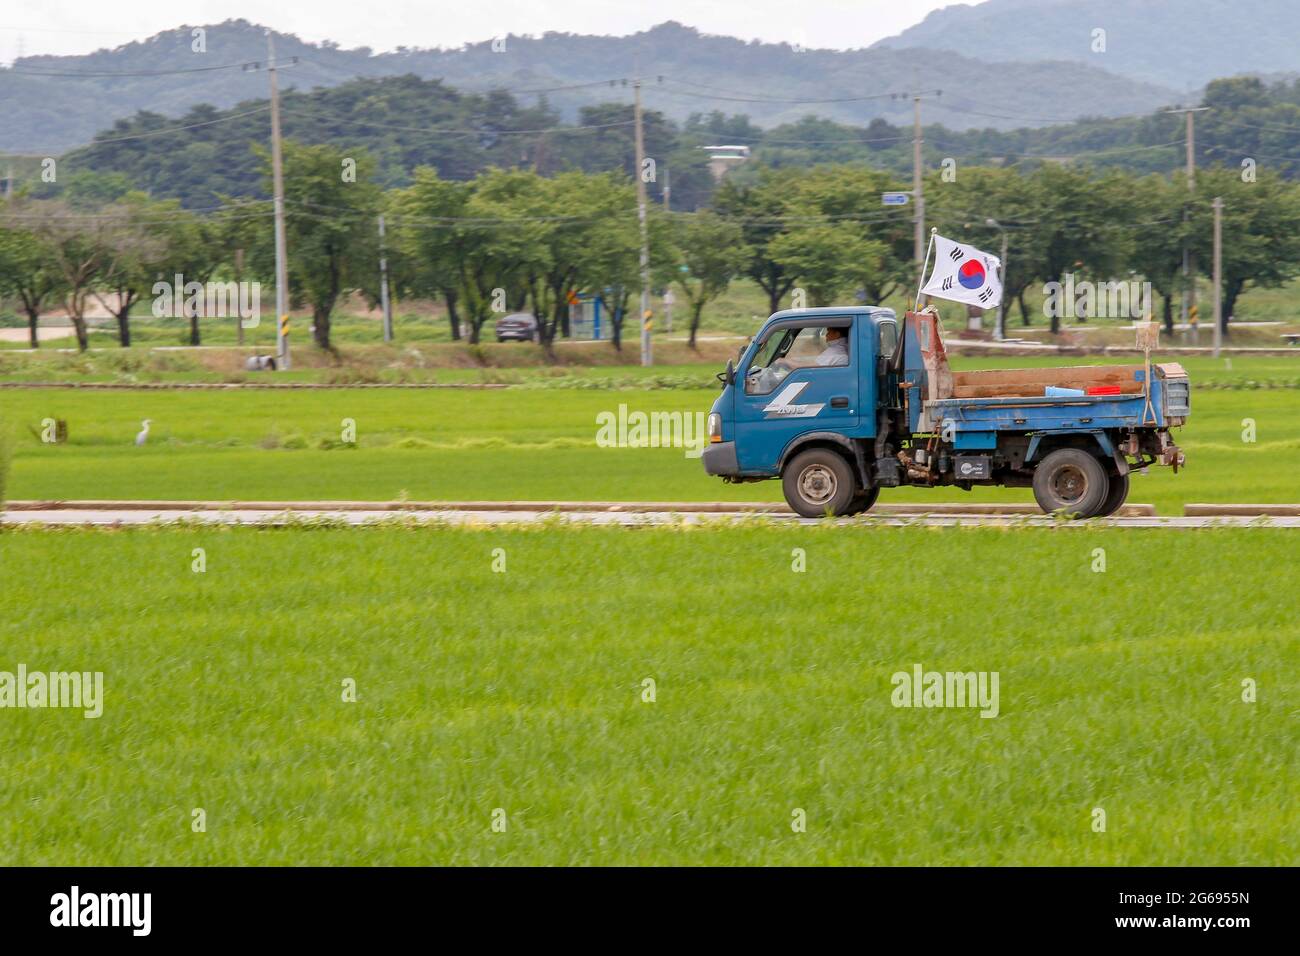 July 4, 2021-Sangju, South Korea-Farmer look their farm field on monsoon season in South Korea. Monsoon rains are likely to hit most parts of the country this weekend, marking the start of the one-month summer rainy season, the state weather agency said Thursday. The Korea Meteorological Administration (KMA) said heavy rains will fall on the southern island of Jeju on Saturday morning and spread to southern and central regions between late Saturday and Sunday. Stock Photo